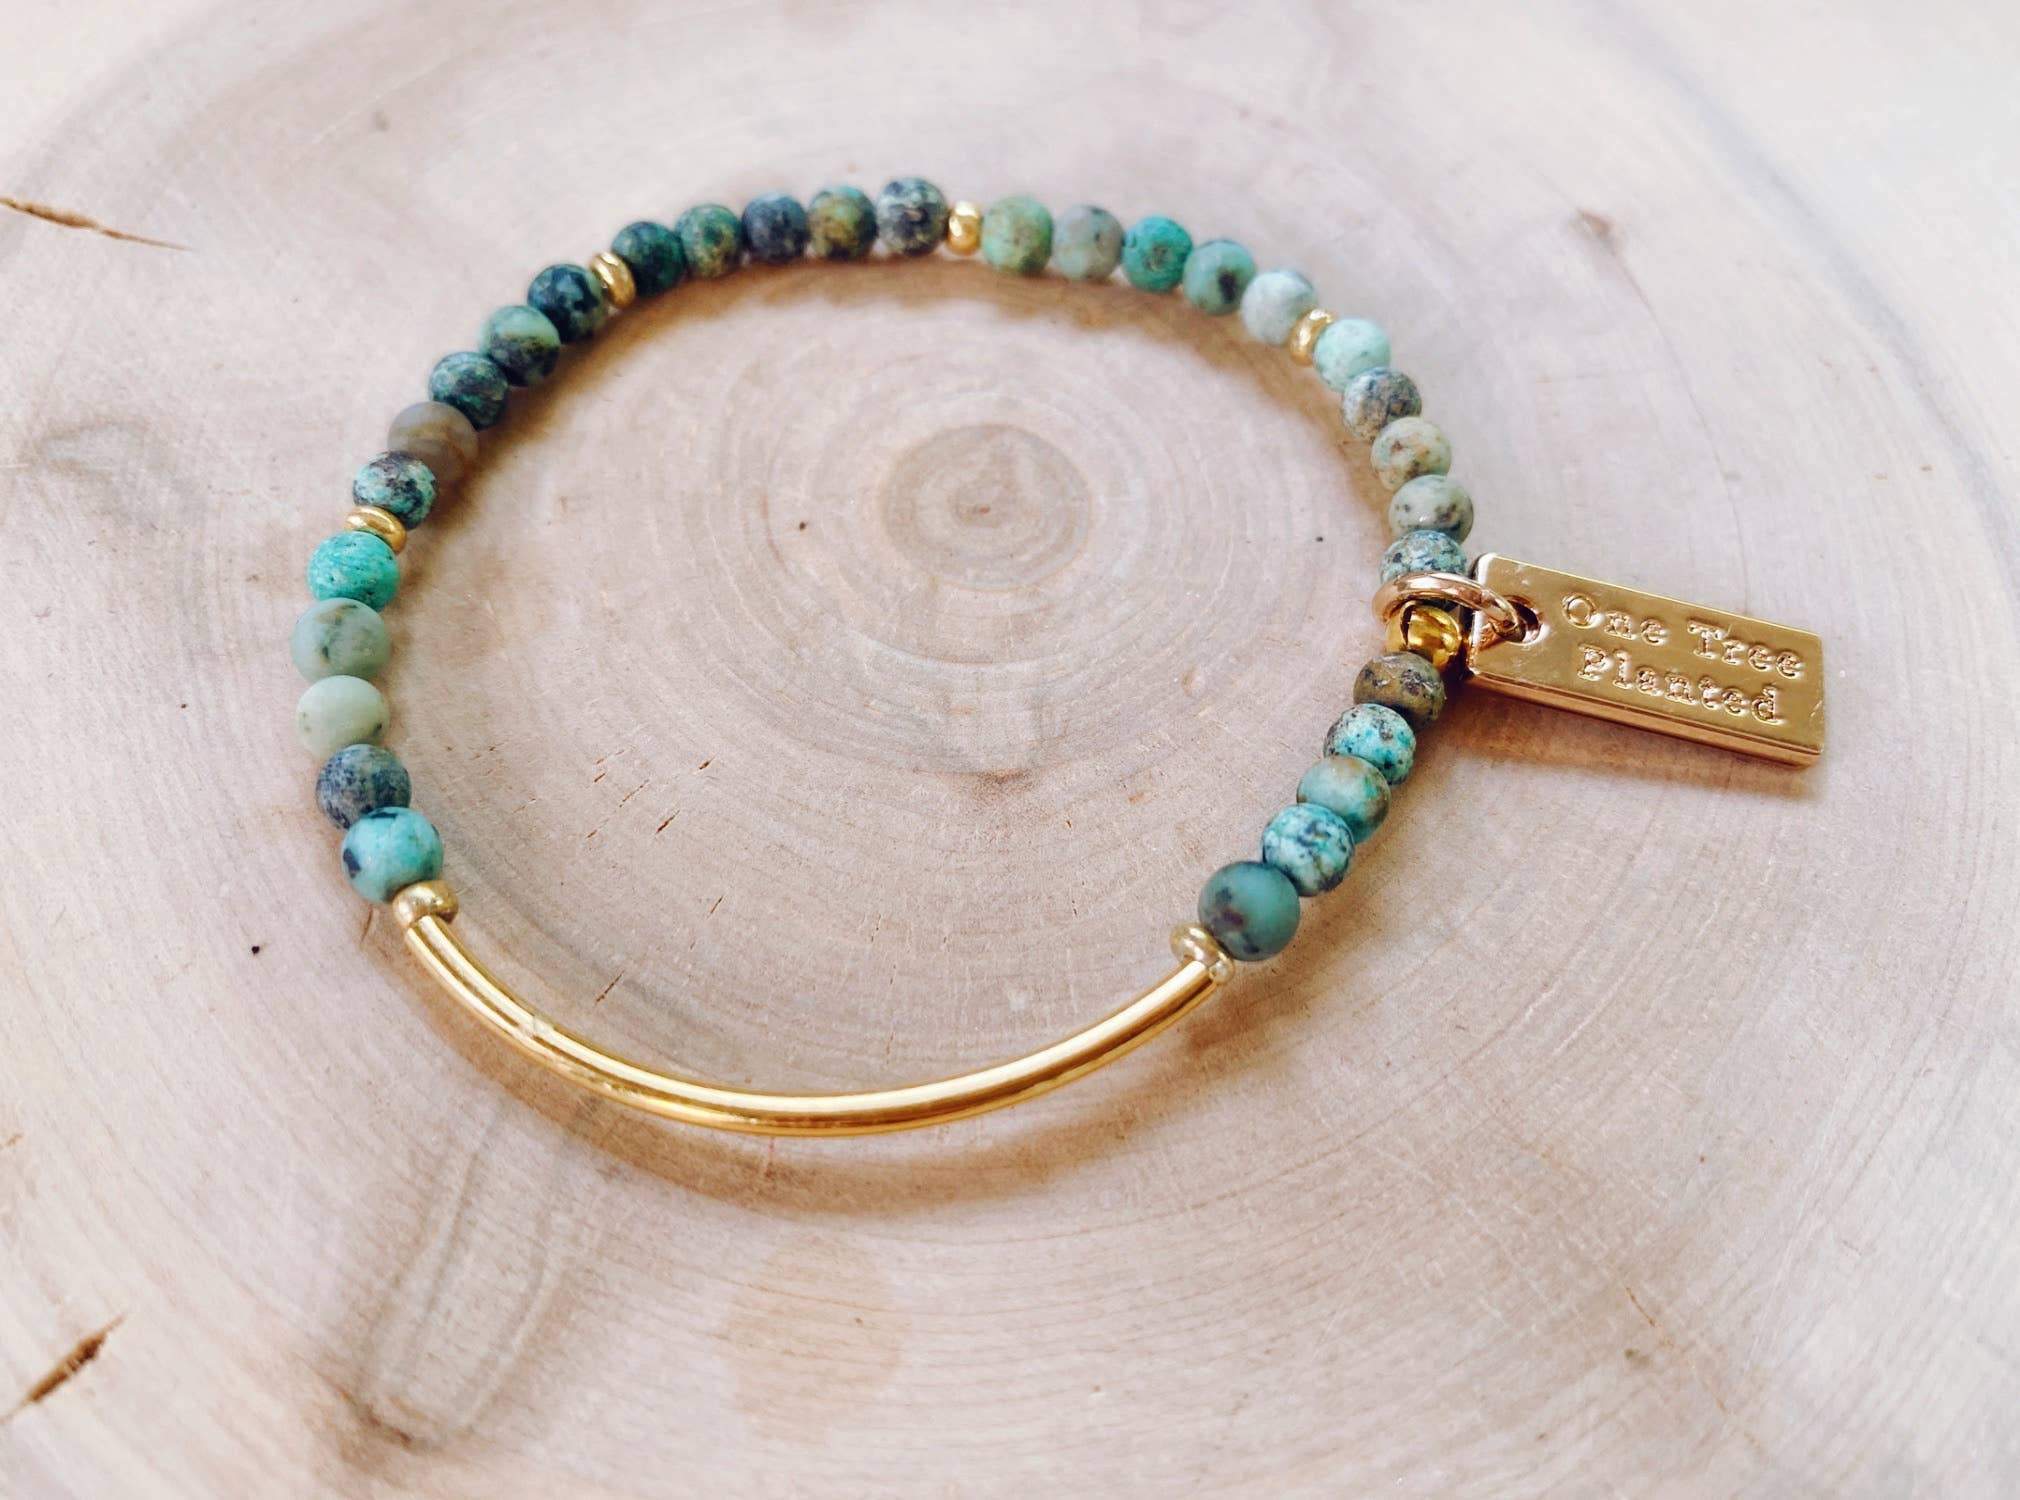 Bracelet with greenish tinted African Turquoise beads and a section of gold band.